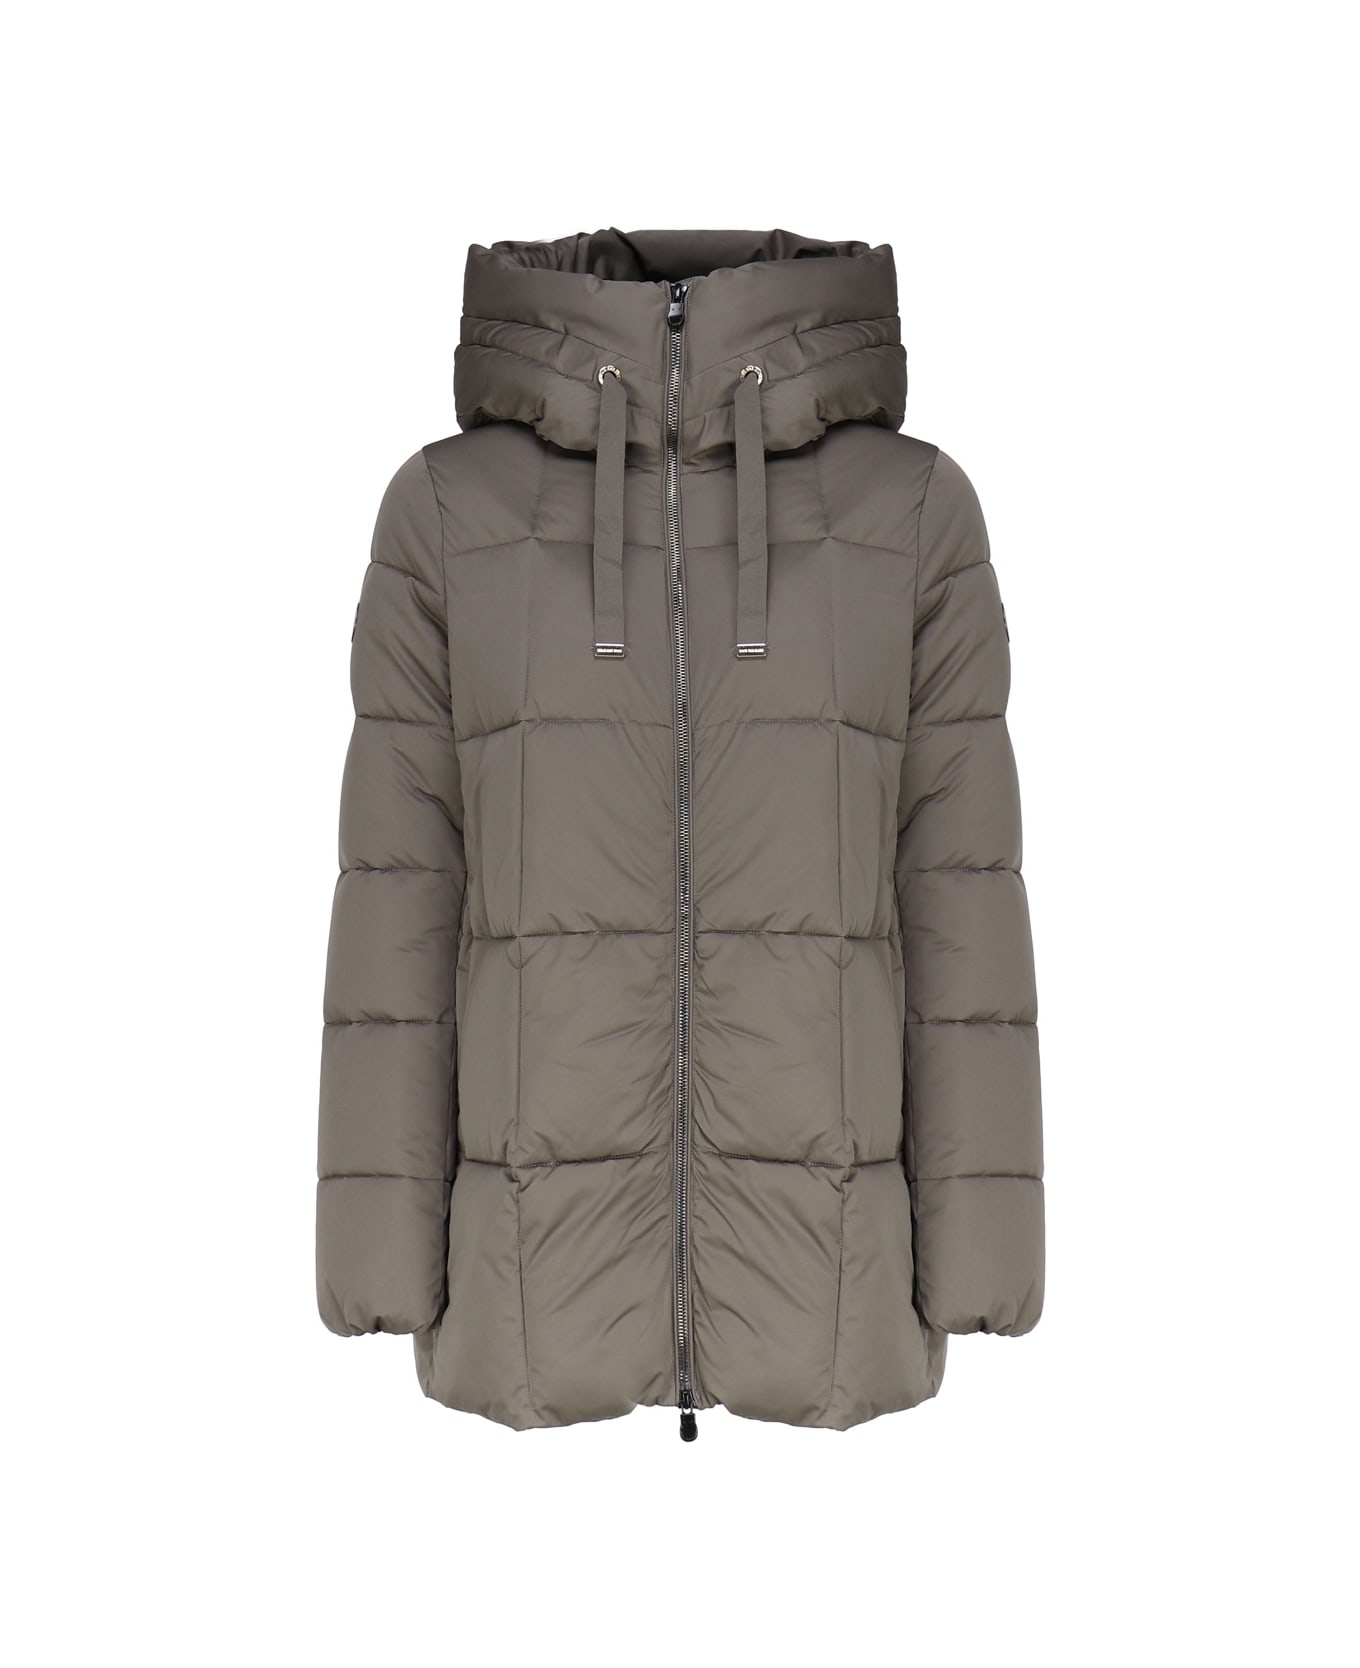 burberry rhodes polo shirt Padded Coat With Hood